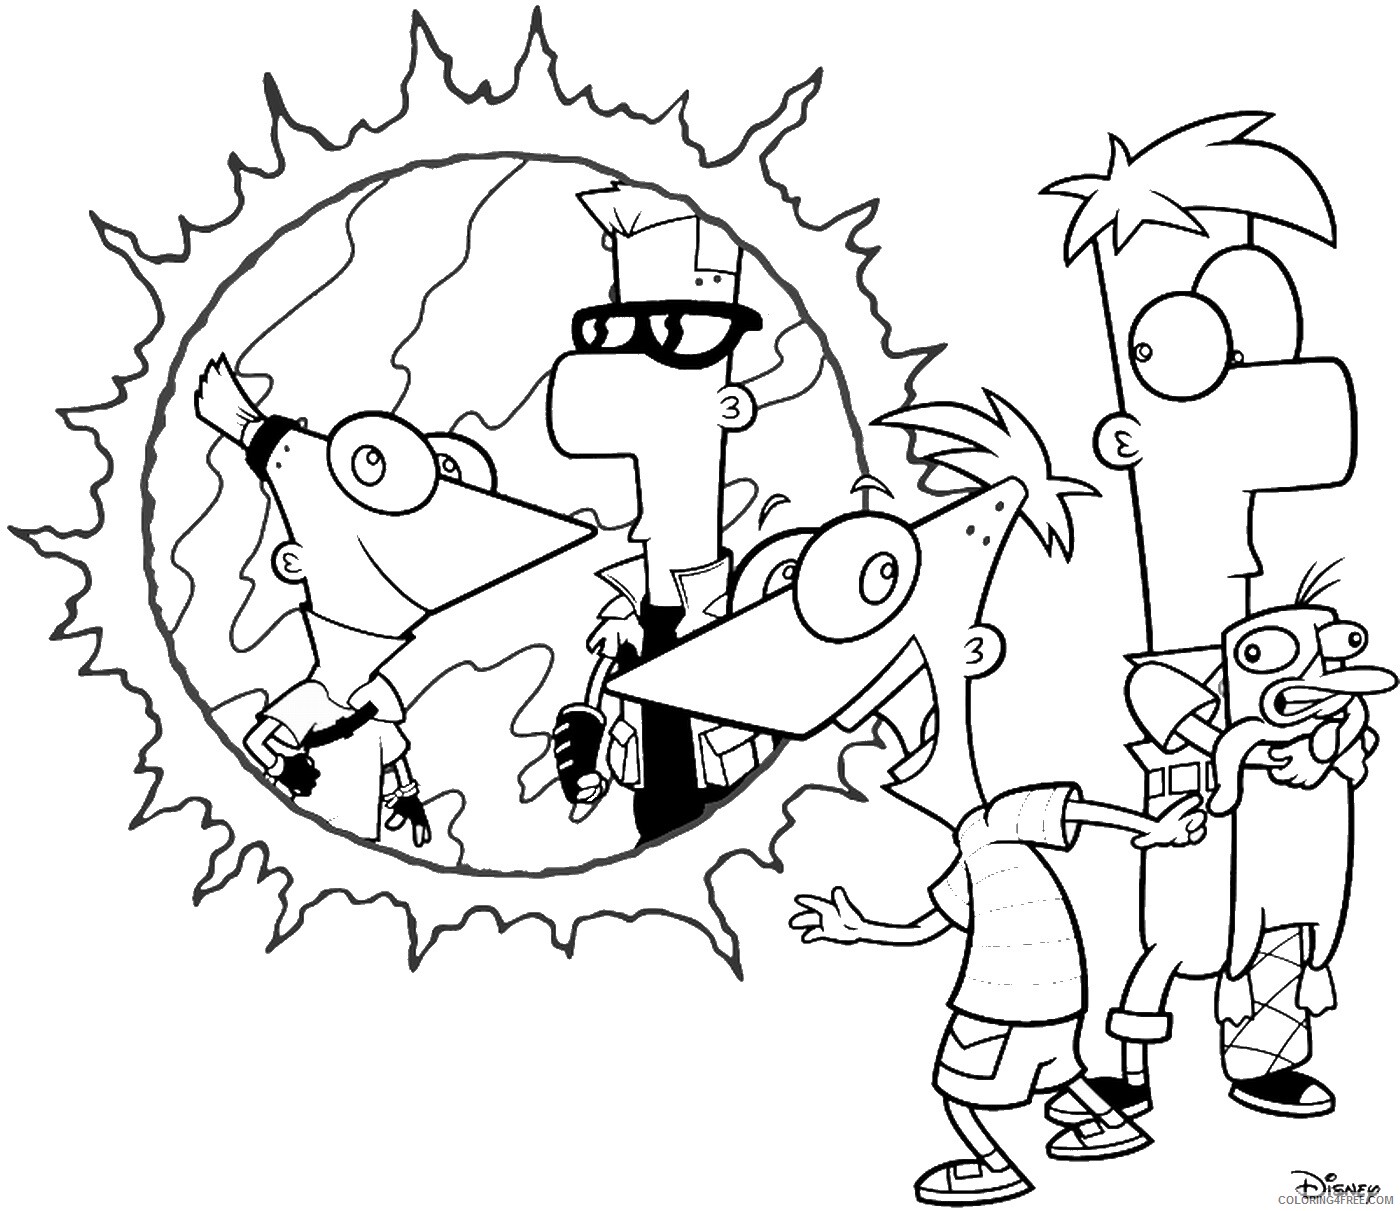 Phineas and Ferb Coloring Pages TV Film phineas_ferb_cl_21 Printable 2020 06173 Coloring4free